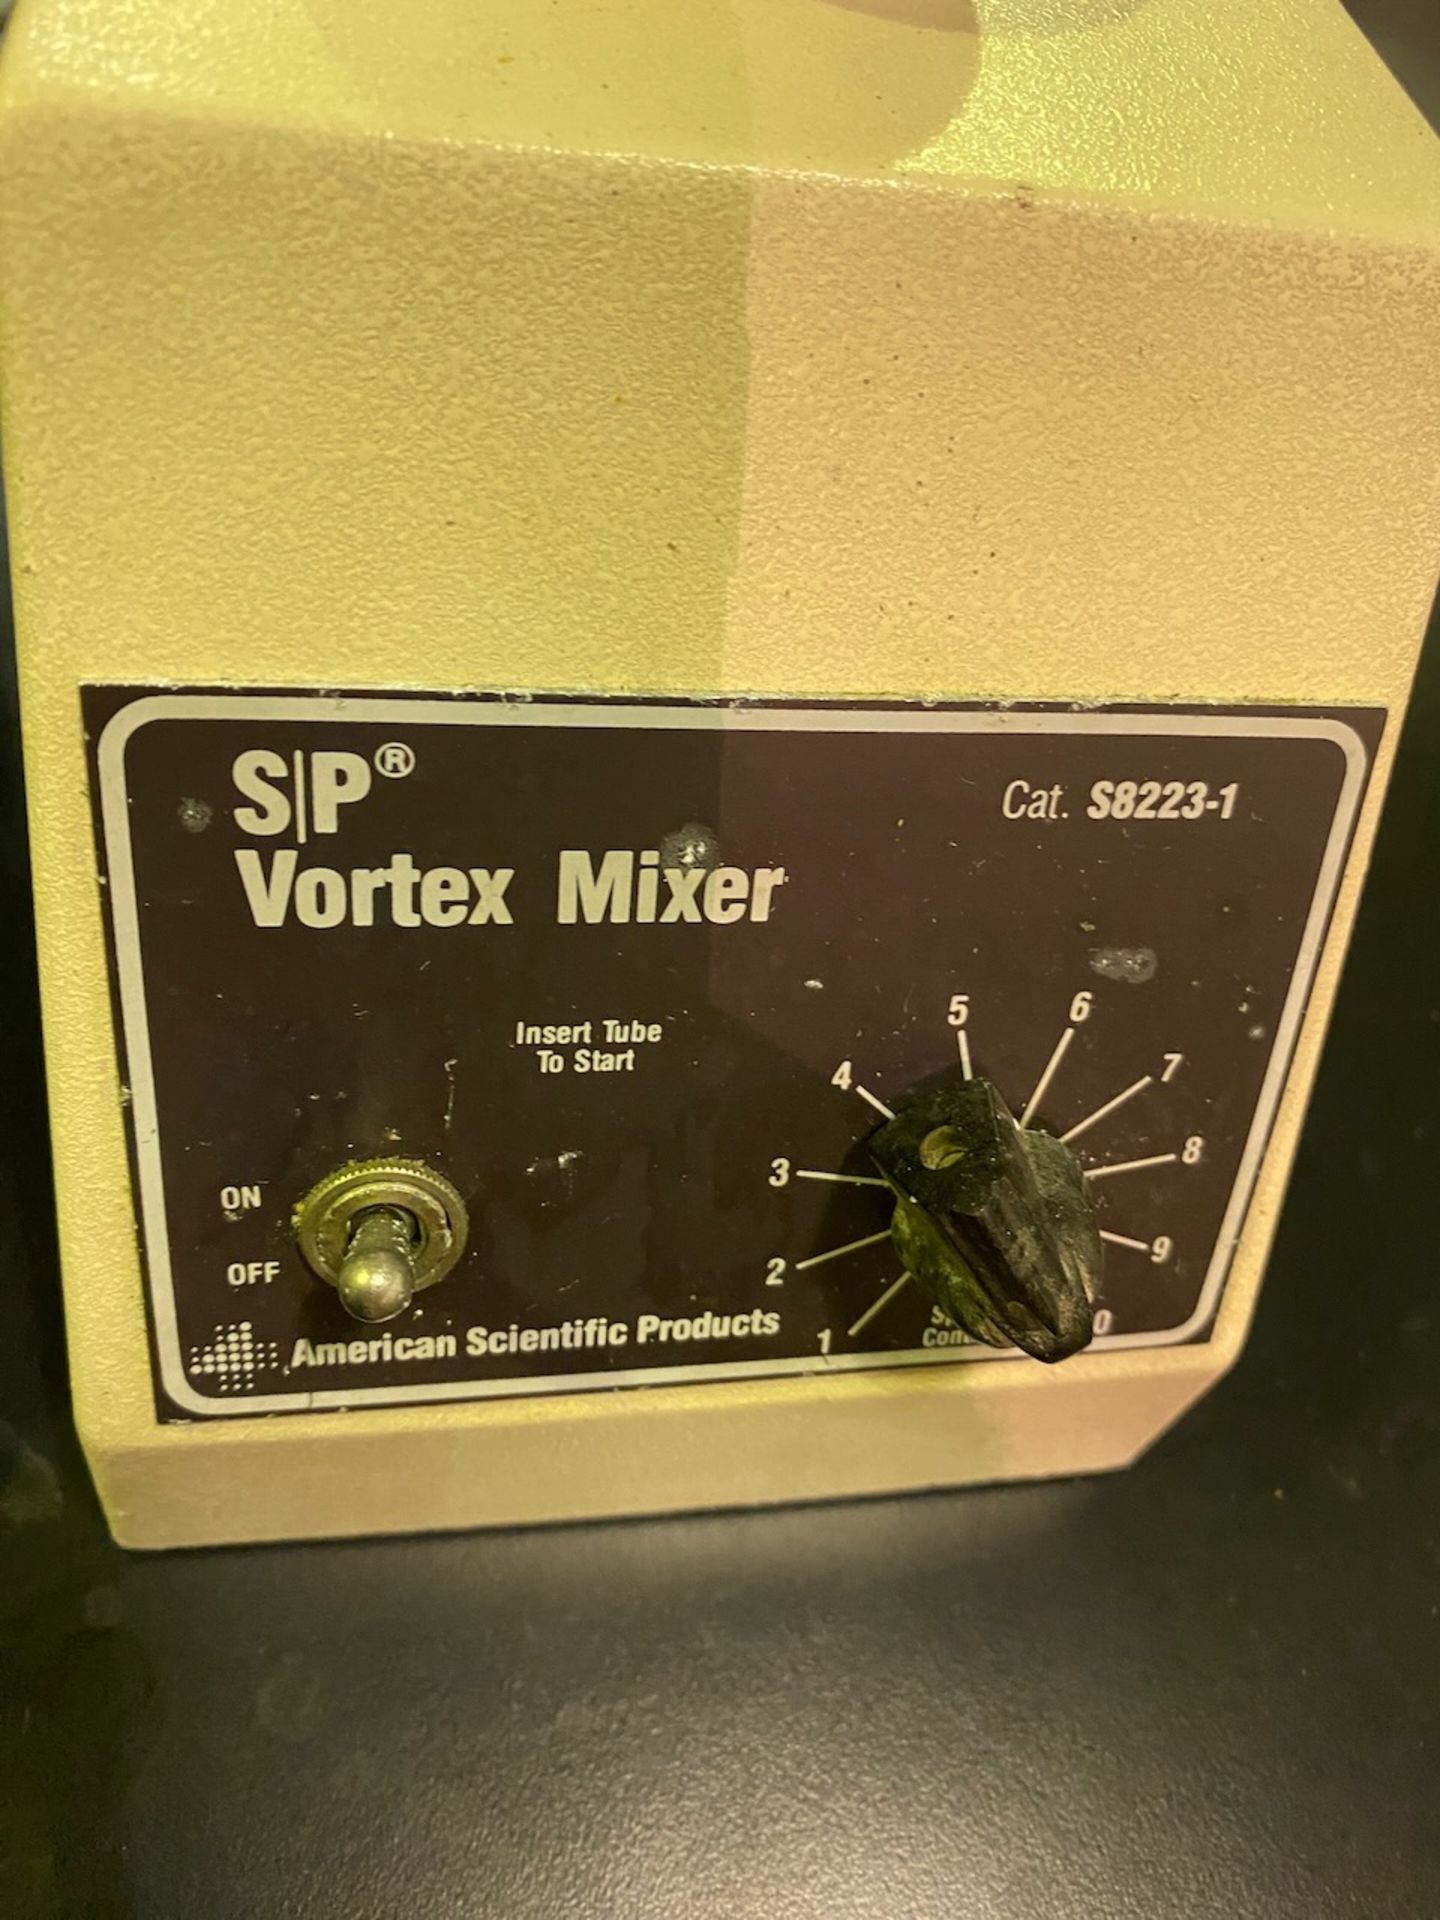 Two Vortex mixers, one IKA MS2 S9 Minishaker, one american scientific products S8223-1 Vortex Mixer. - Image 3 of 5